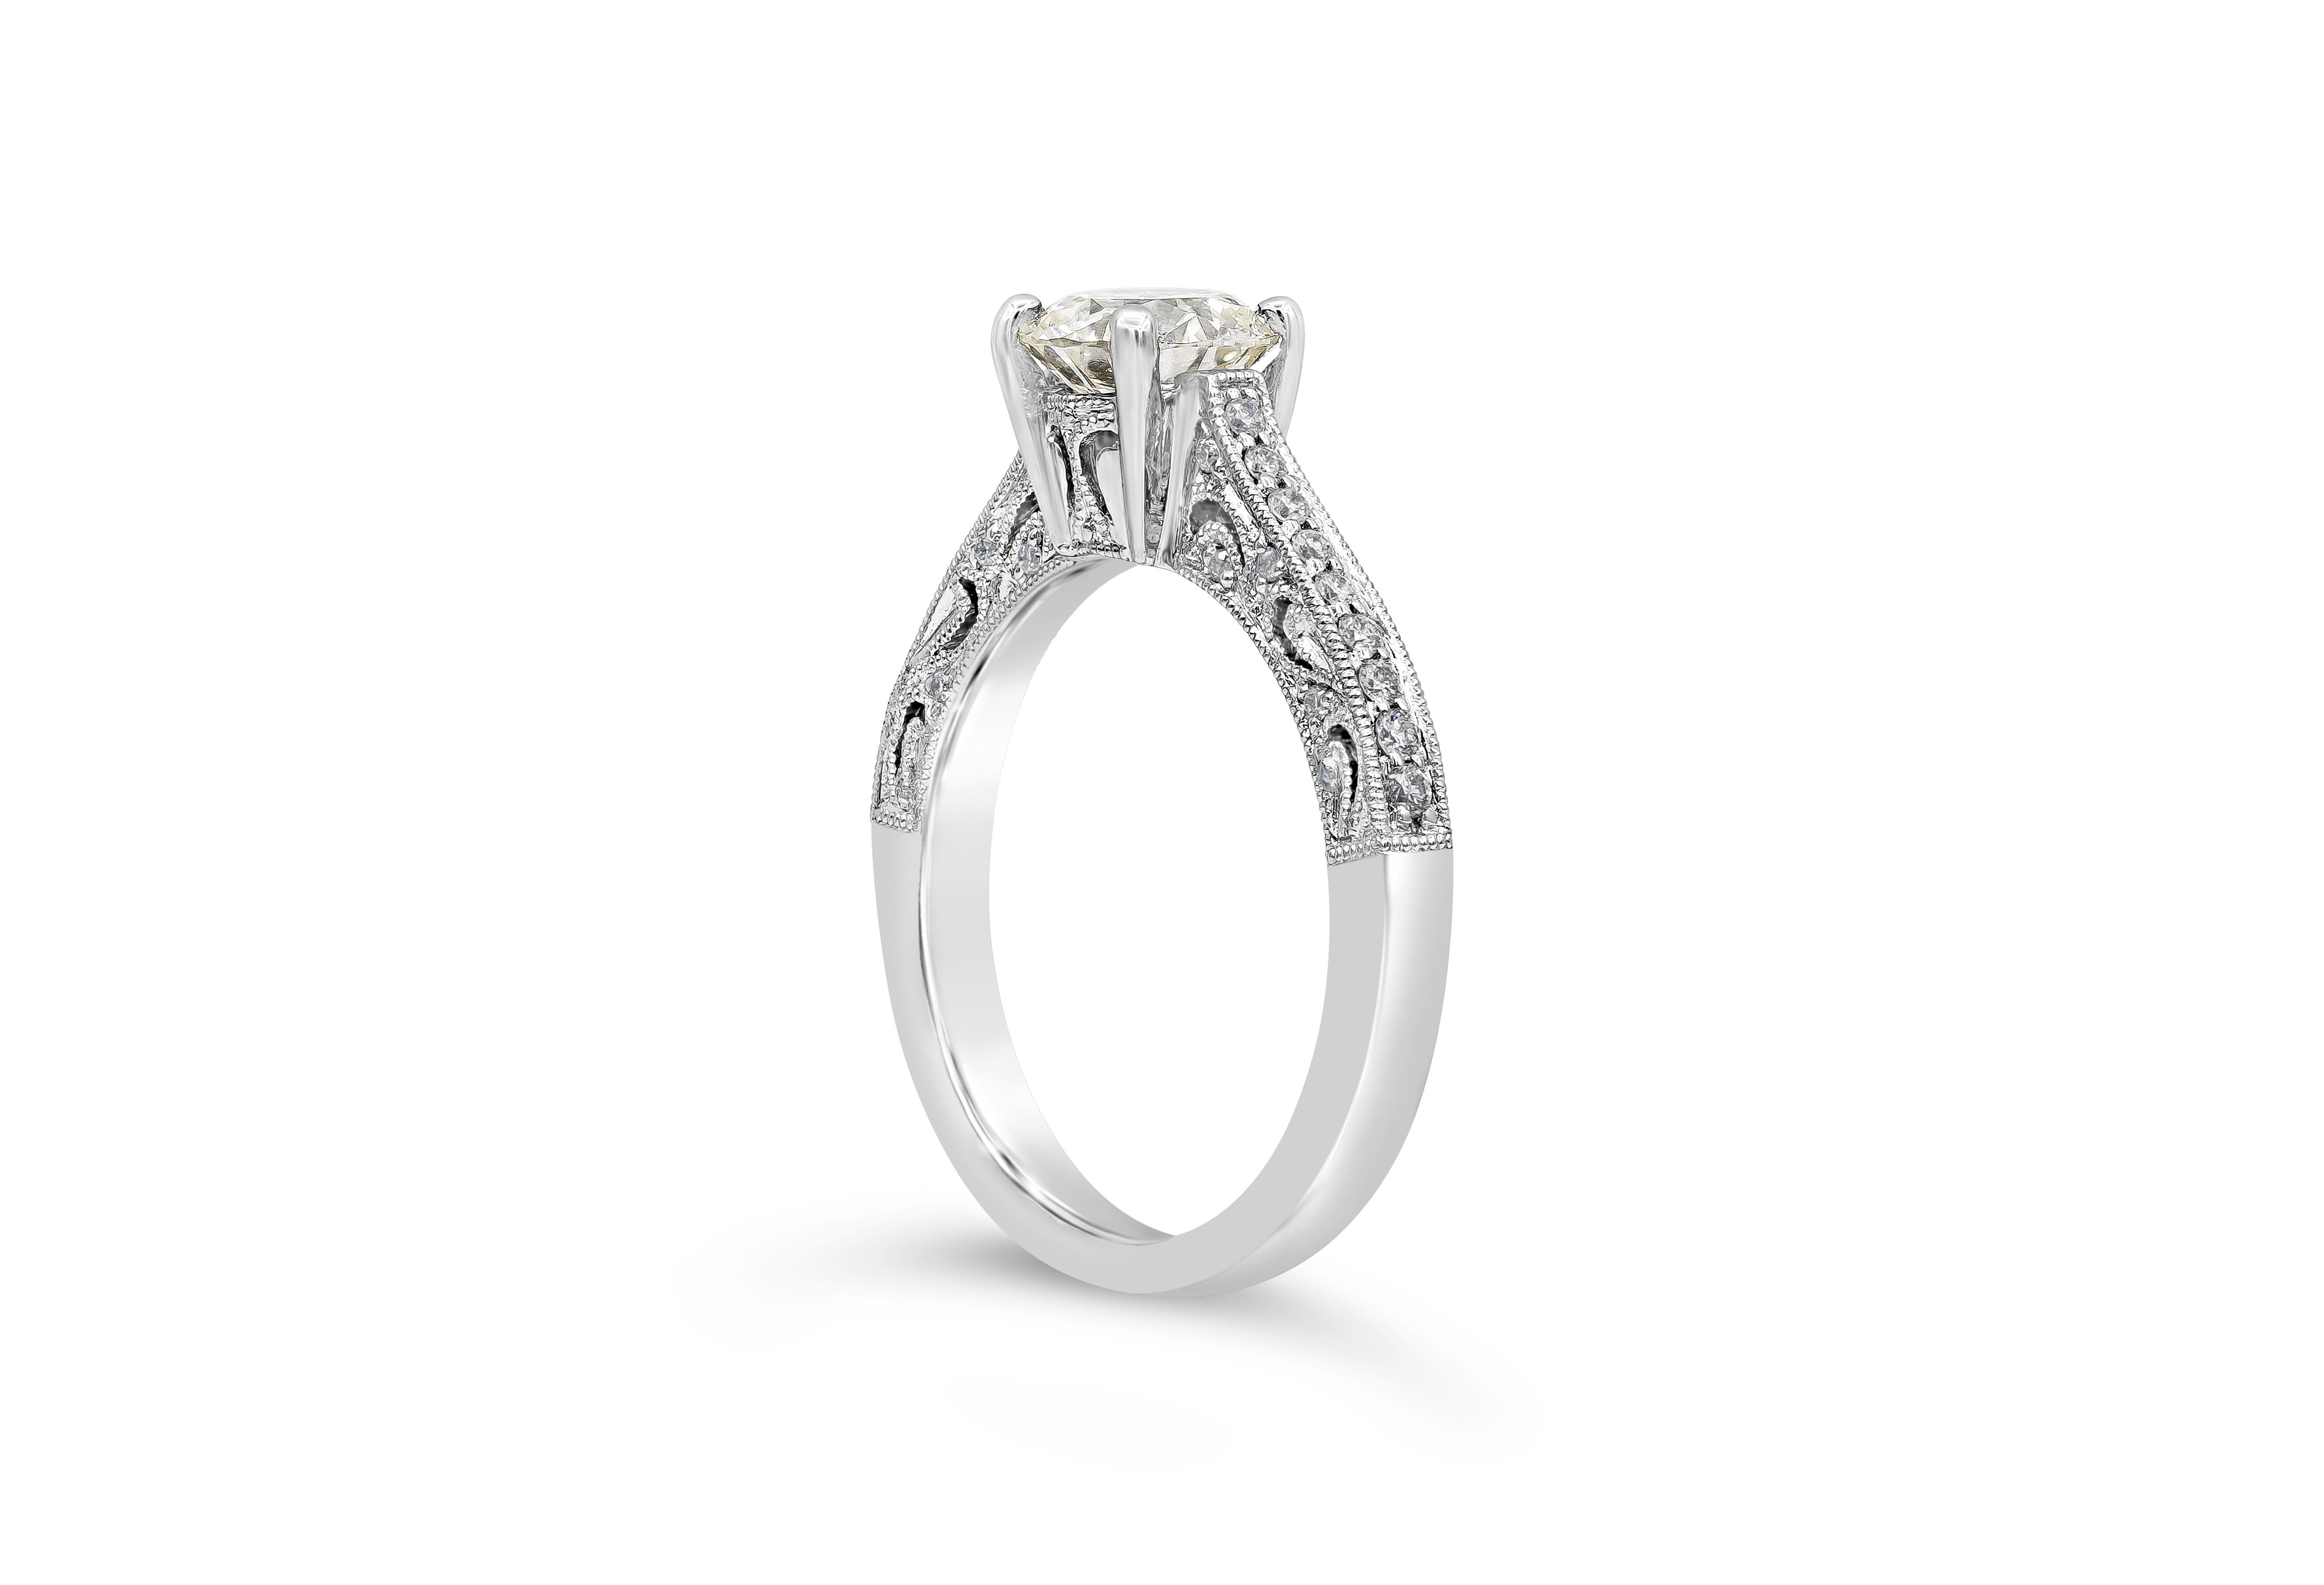 This simple and vintage engagement ring style handcrafted in 18k white gold features a 1.07 carats round brilliant diamond certified by GIA as L color, VS2 in clarity, accented by round brilliant diamonds on either side. Finished with filigree and